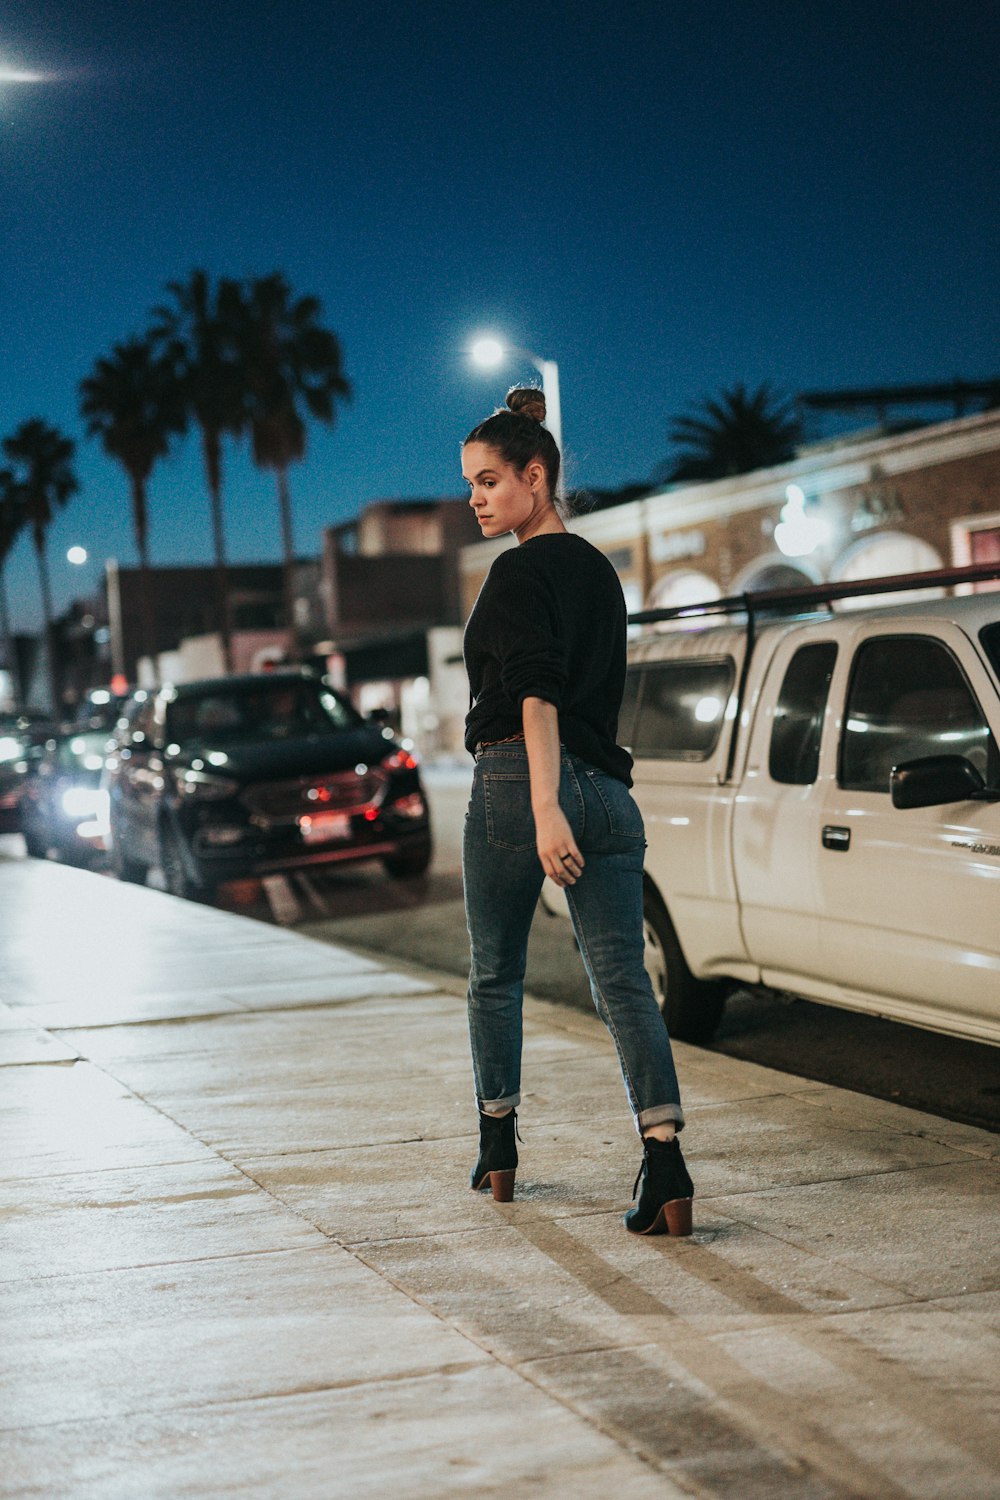 women's wearing in black top and blue denim jeans walks on brown concrete pathway beside road with vehicles